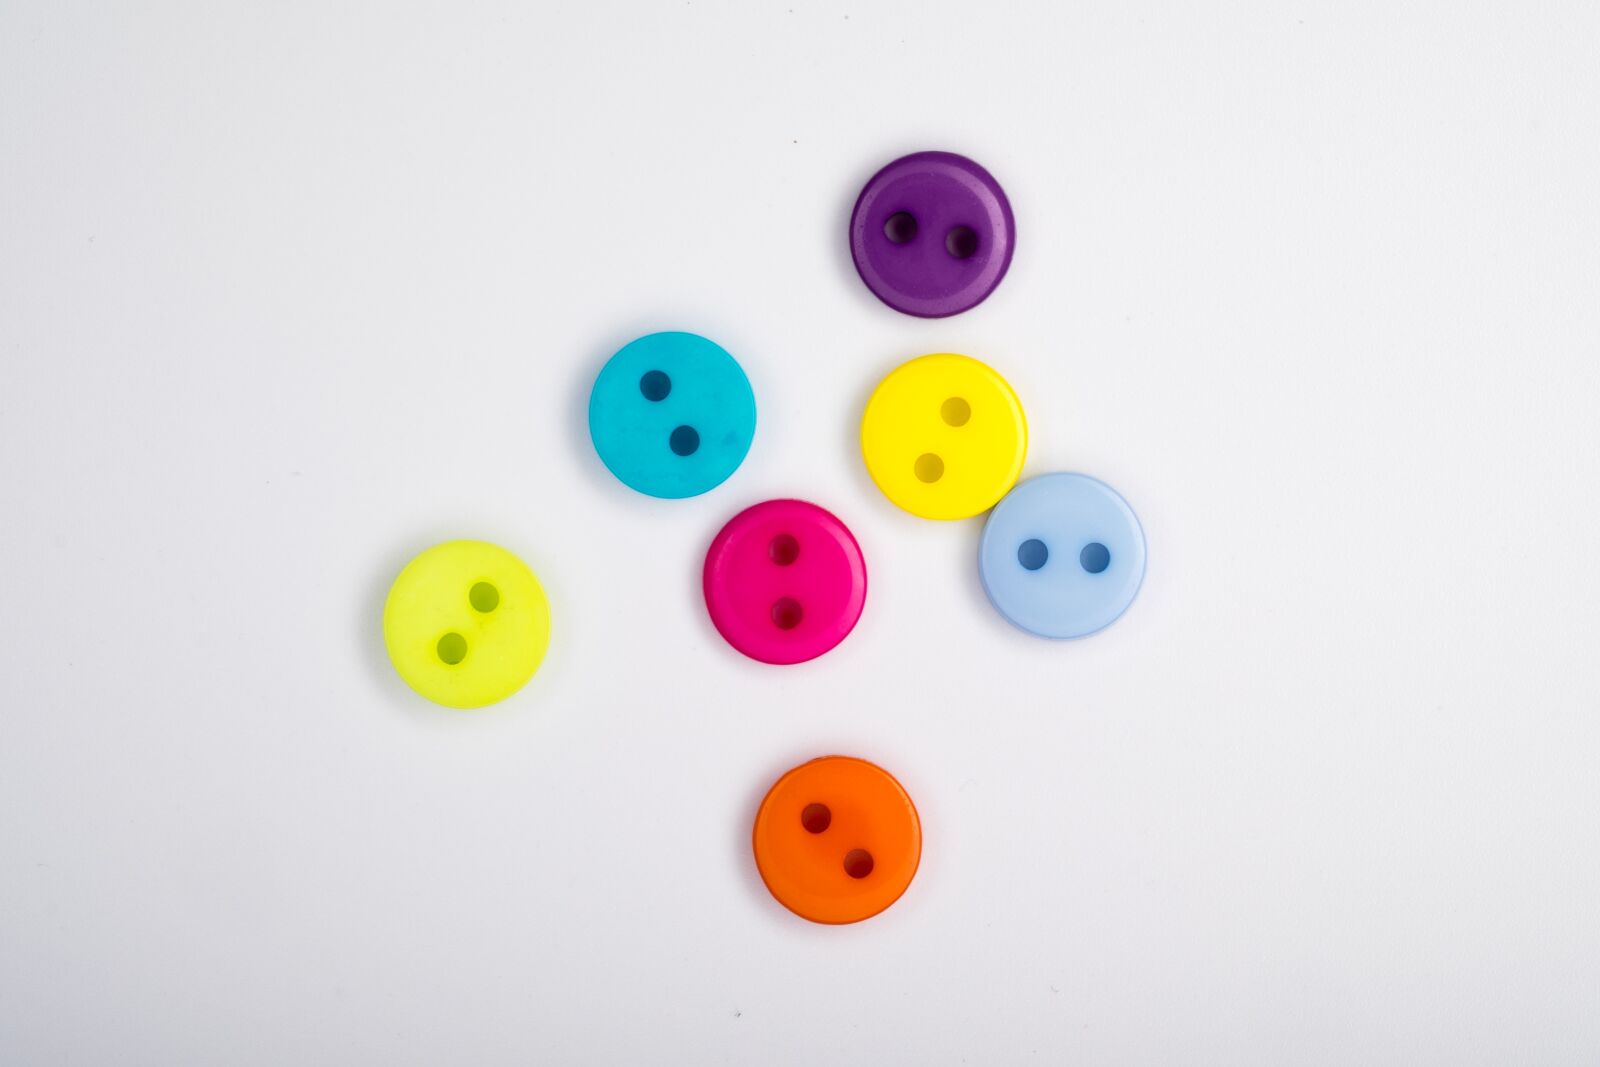 Fujifilm X-T1 + Fujifilm XF 60mm F2.4 R Macro sample photo. Buttons, colored buttons, colored photography